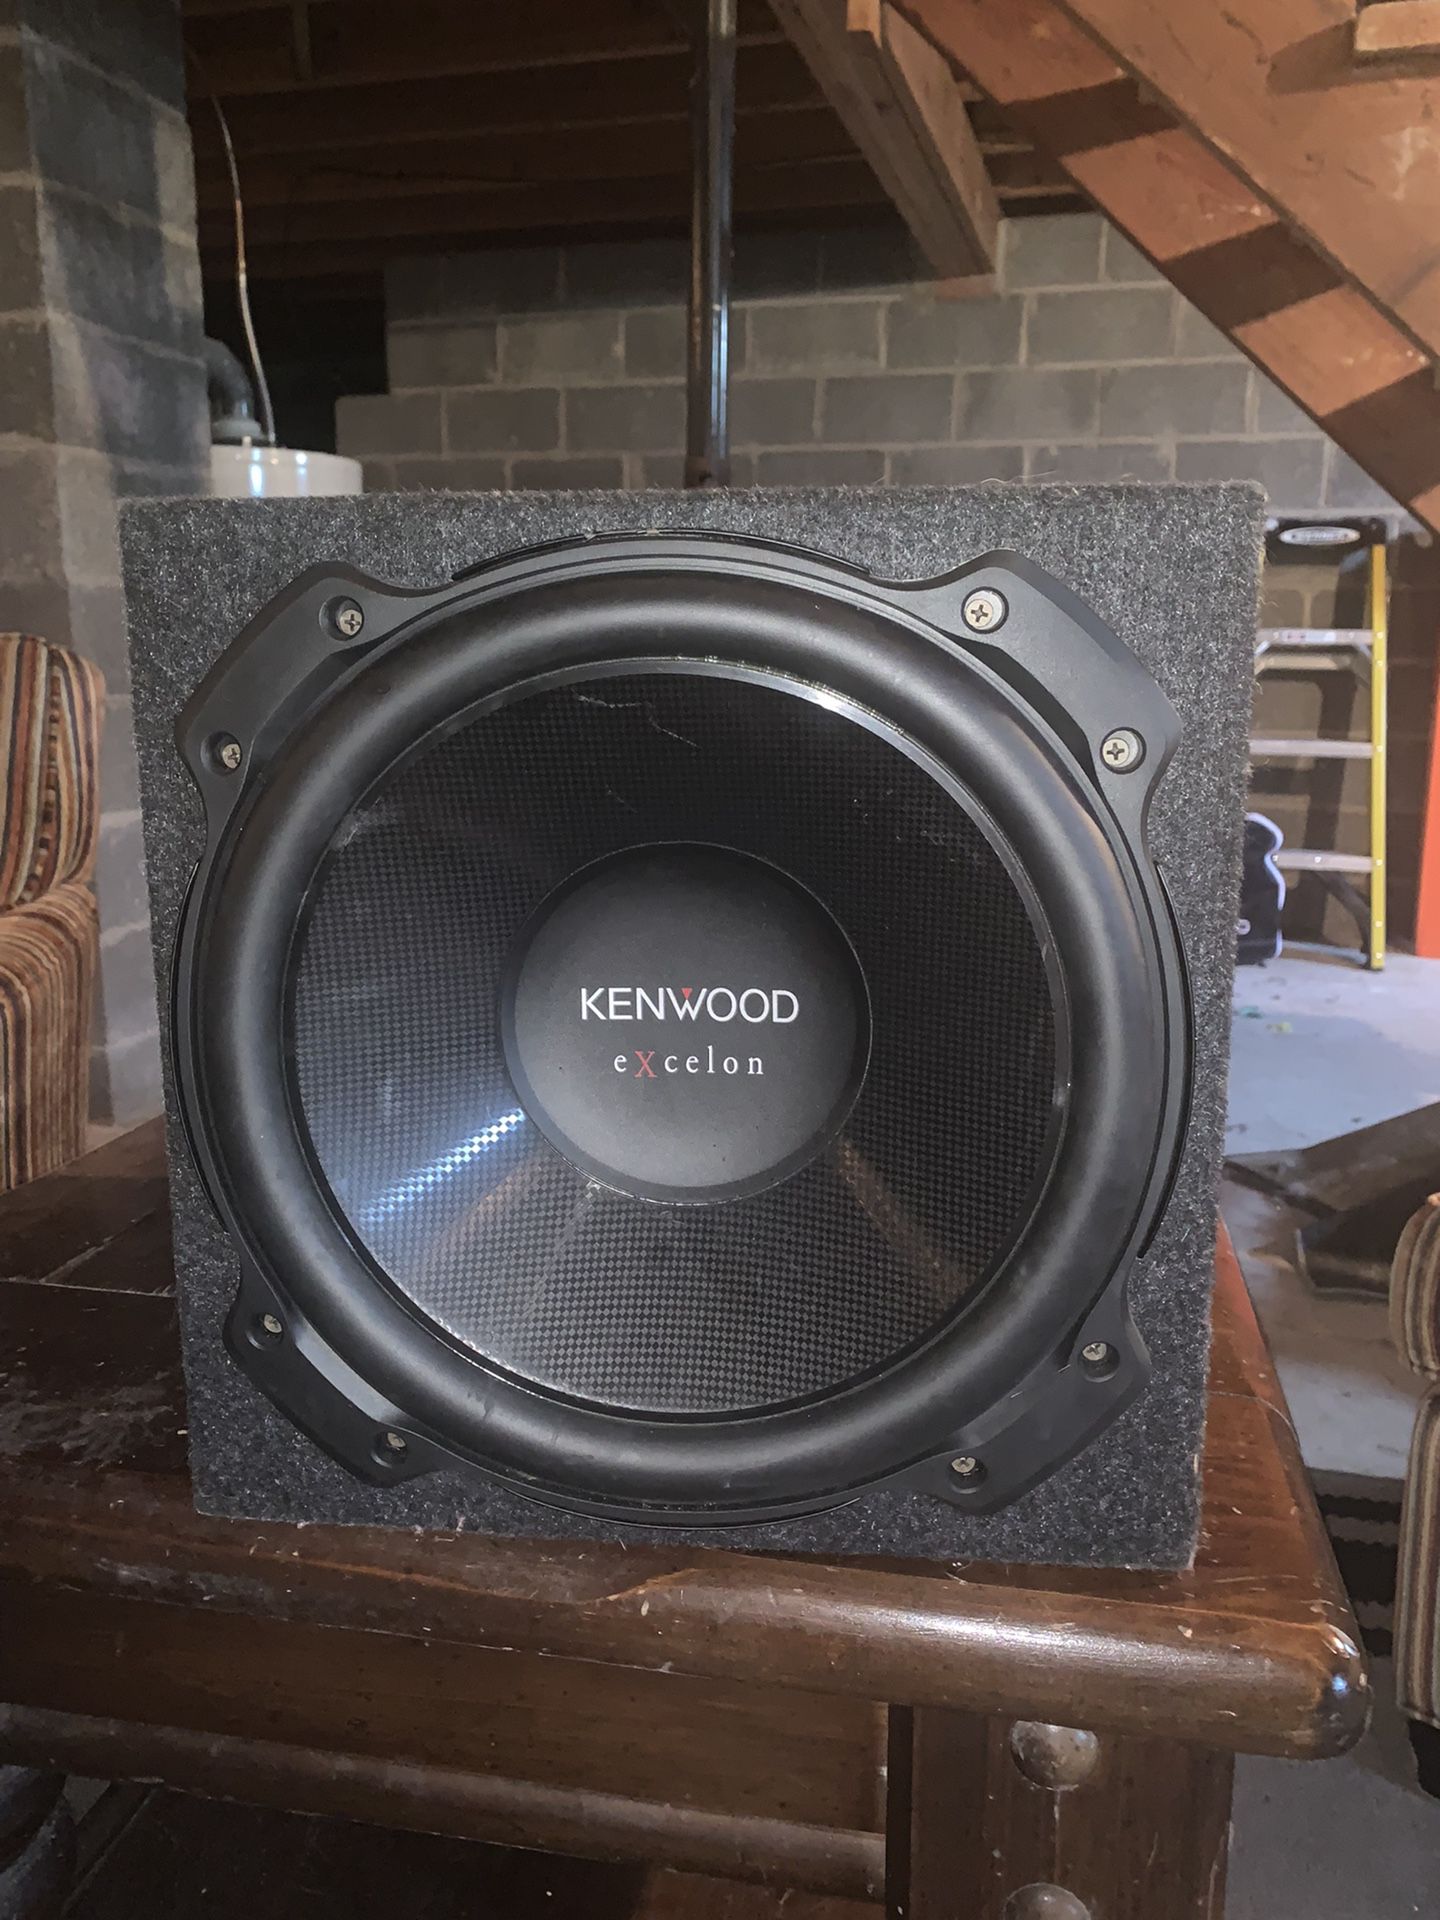 Kenwood Excelon KFC-XW120 400 Watts Single Voice Coil 4 Ohm 12" Car Subwoofer With 1000 Watt AMP & All Coresponding Wires Pre Installed 